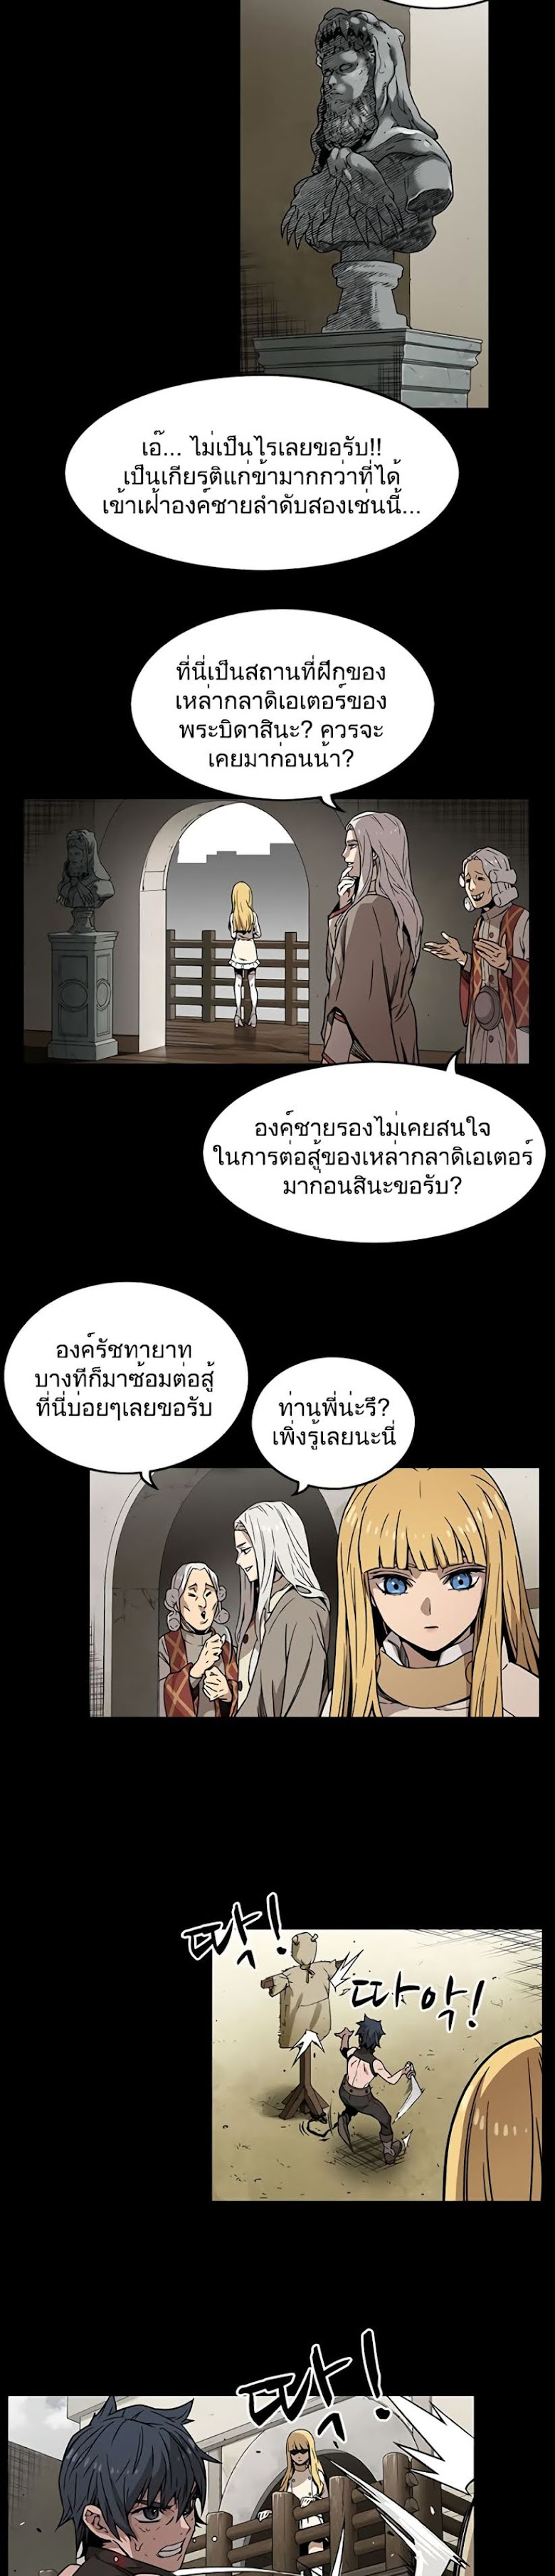 Aire - หน้า 22